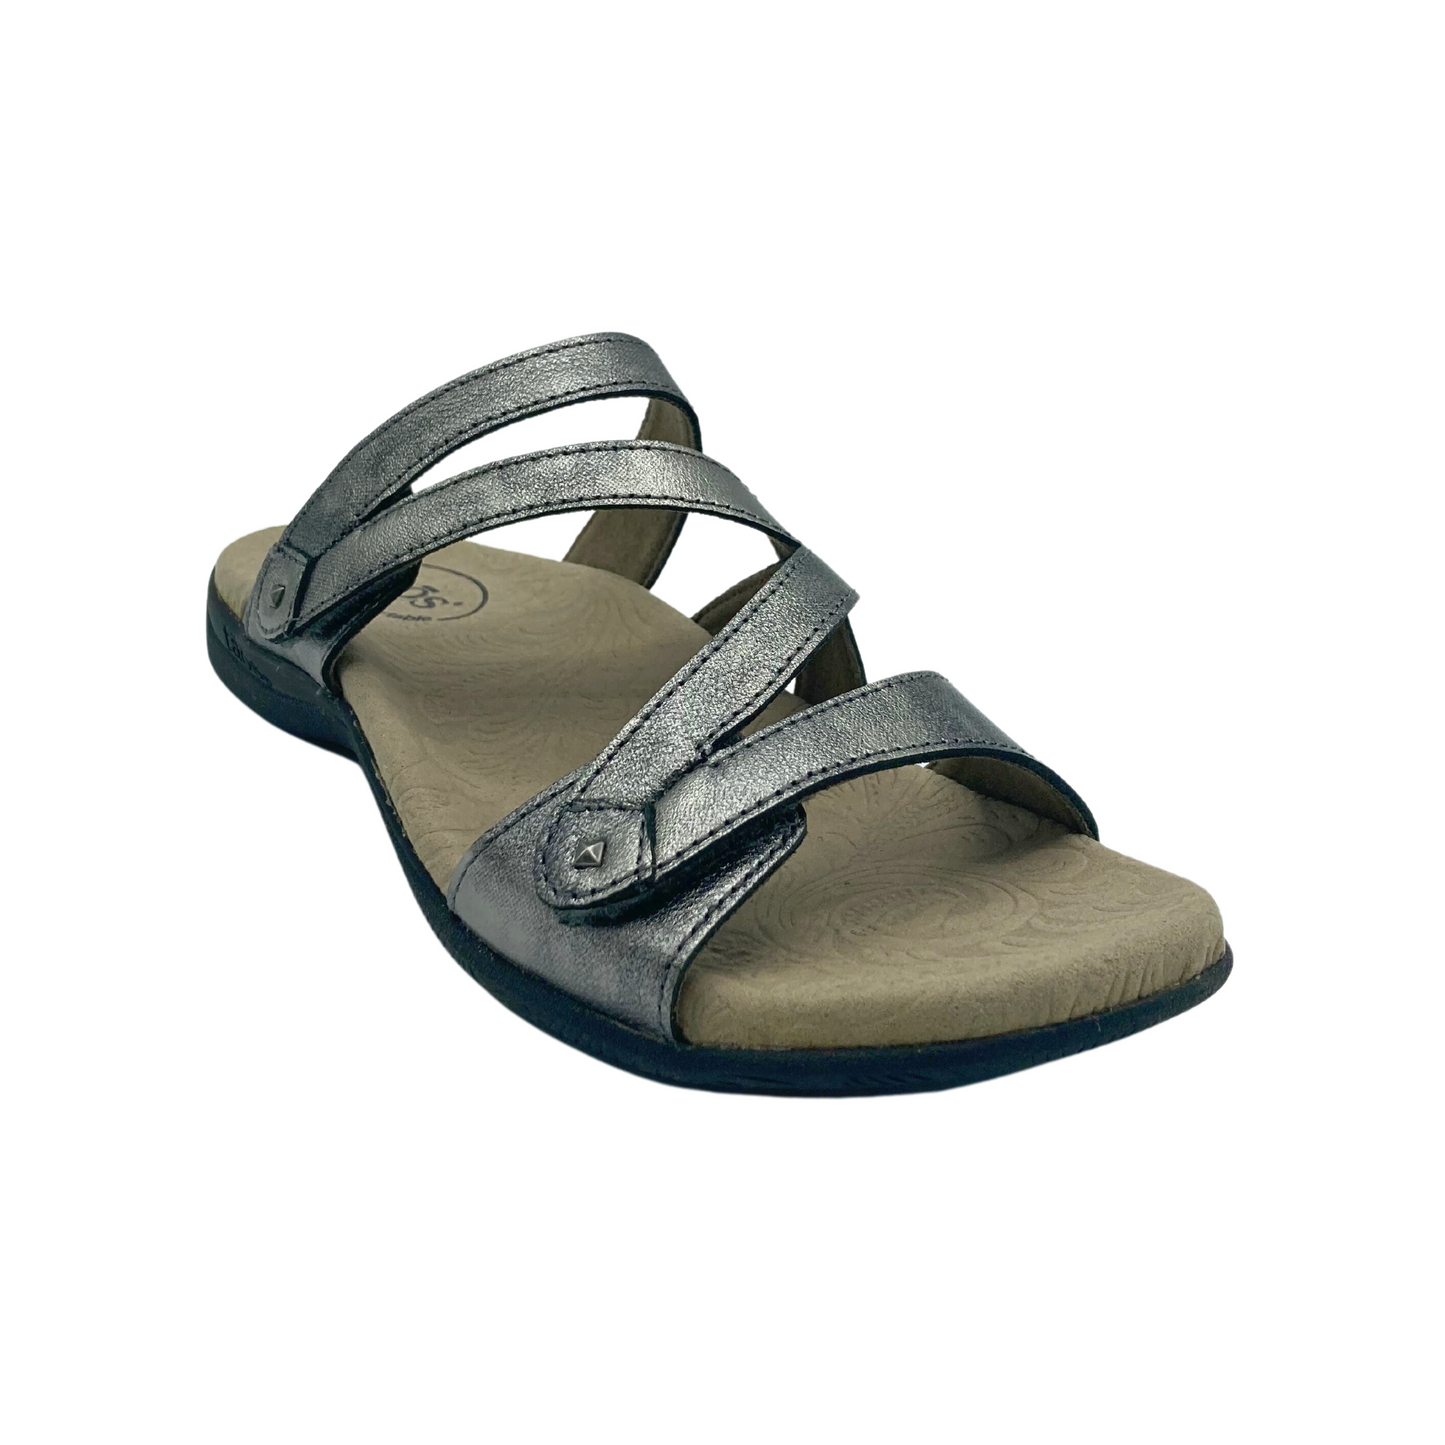 Front side angle view of right sandal in style Taos Double U